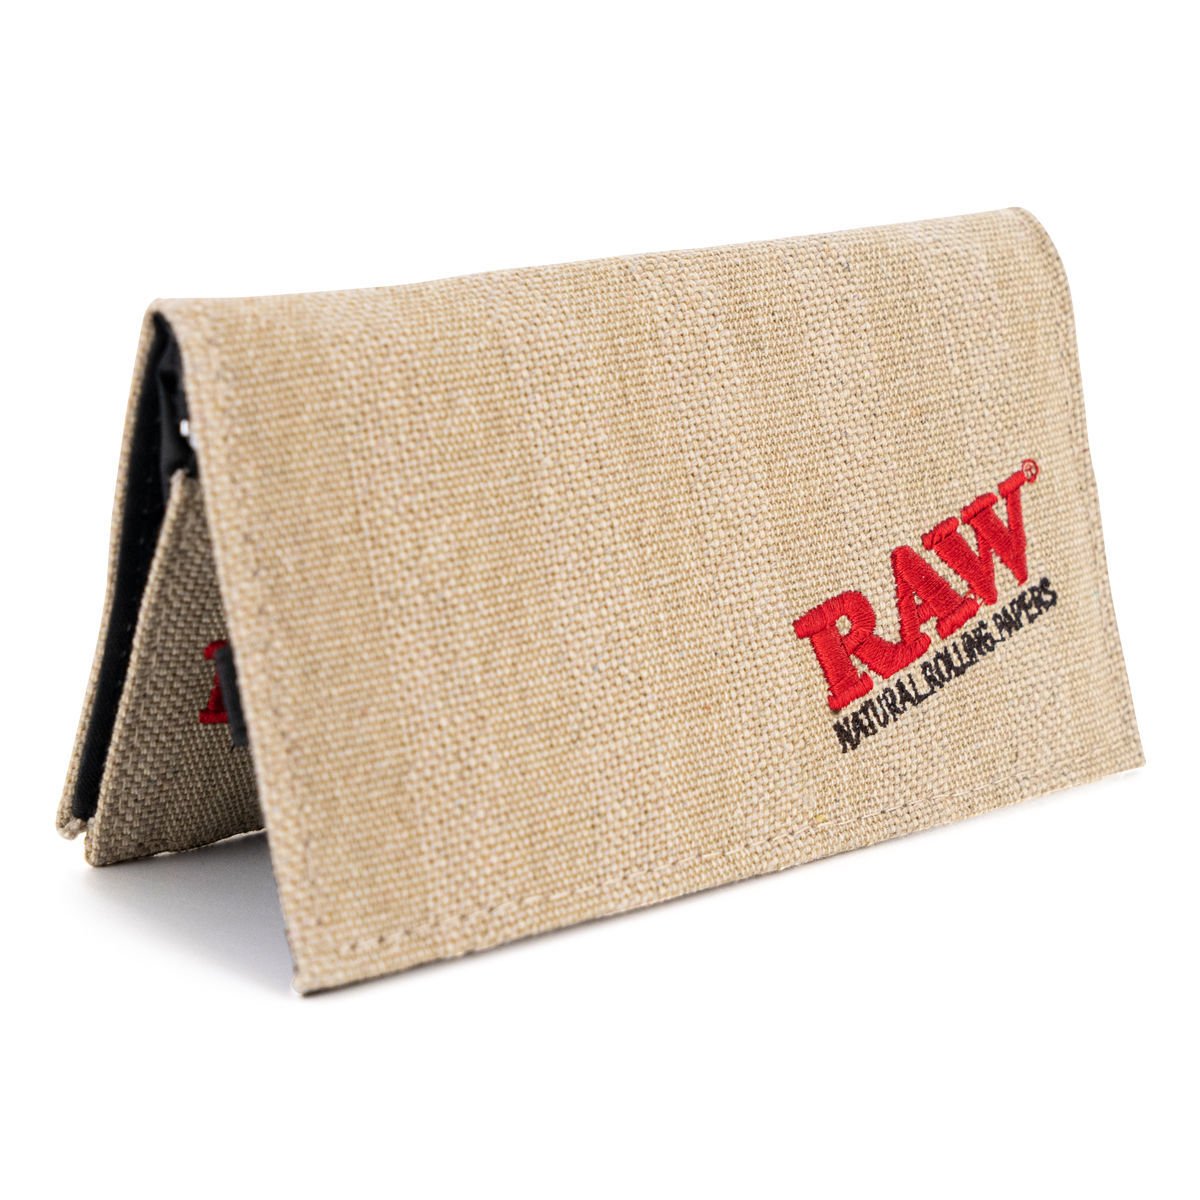 P030-Raw Smokers Wallet 01_420.mt